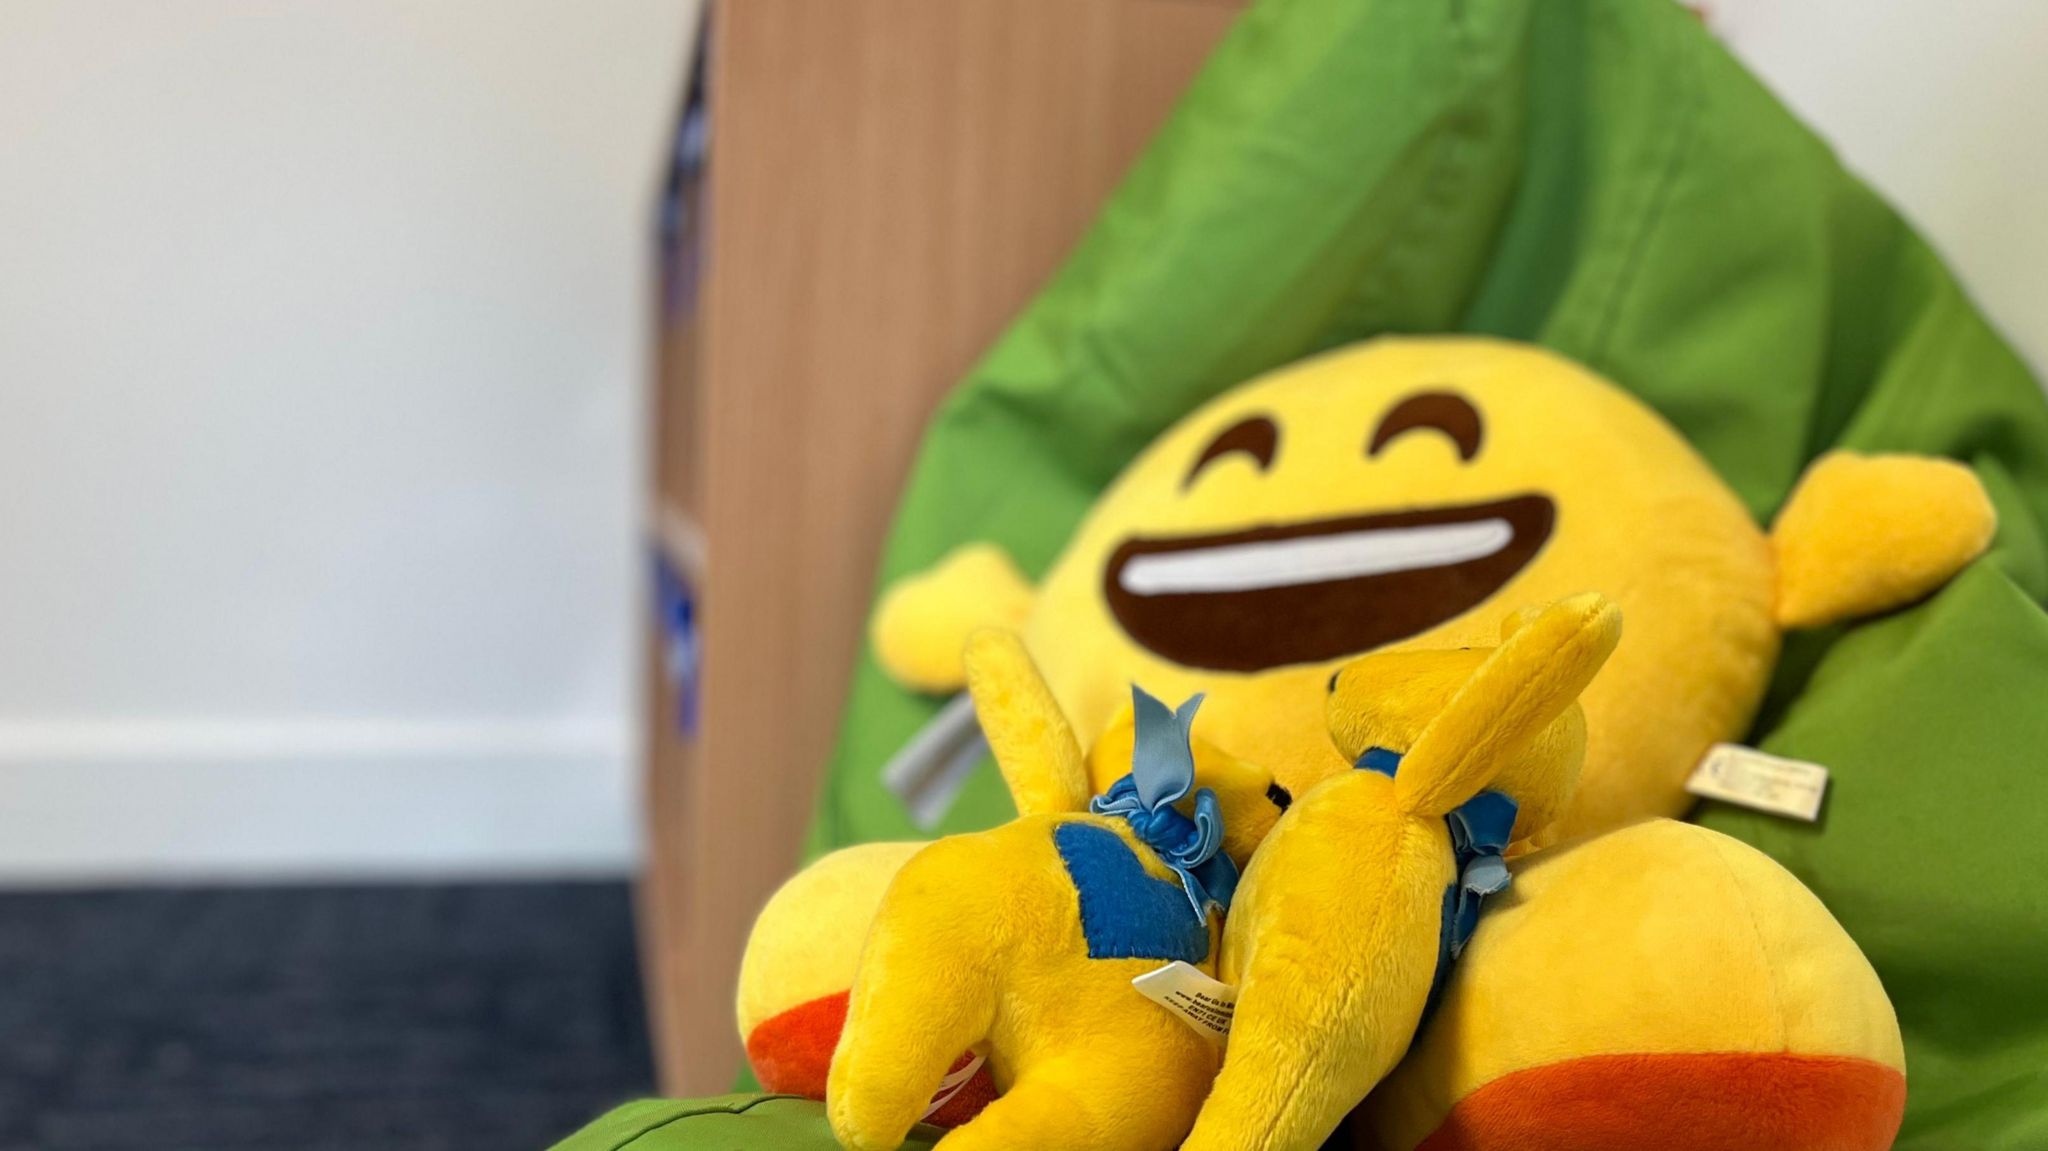 smiley face stuffed toy on a green bean bag